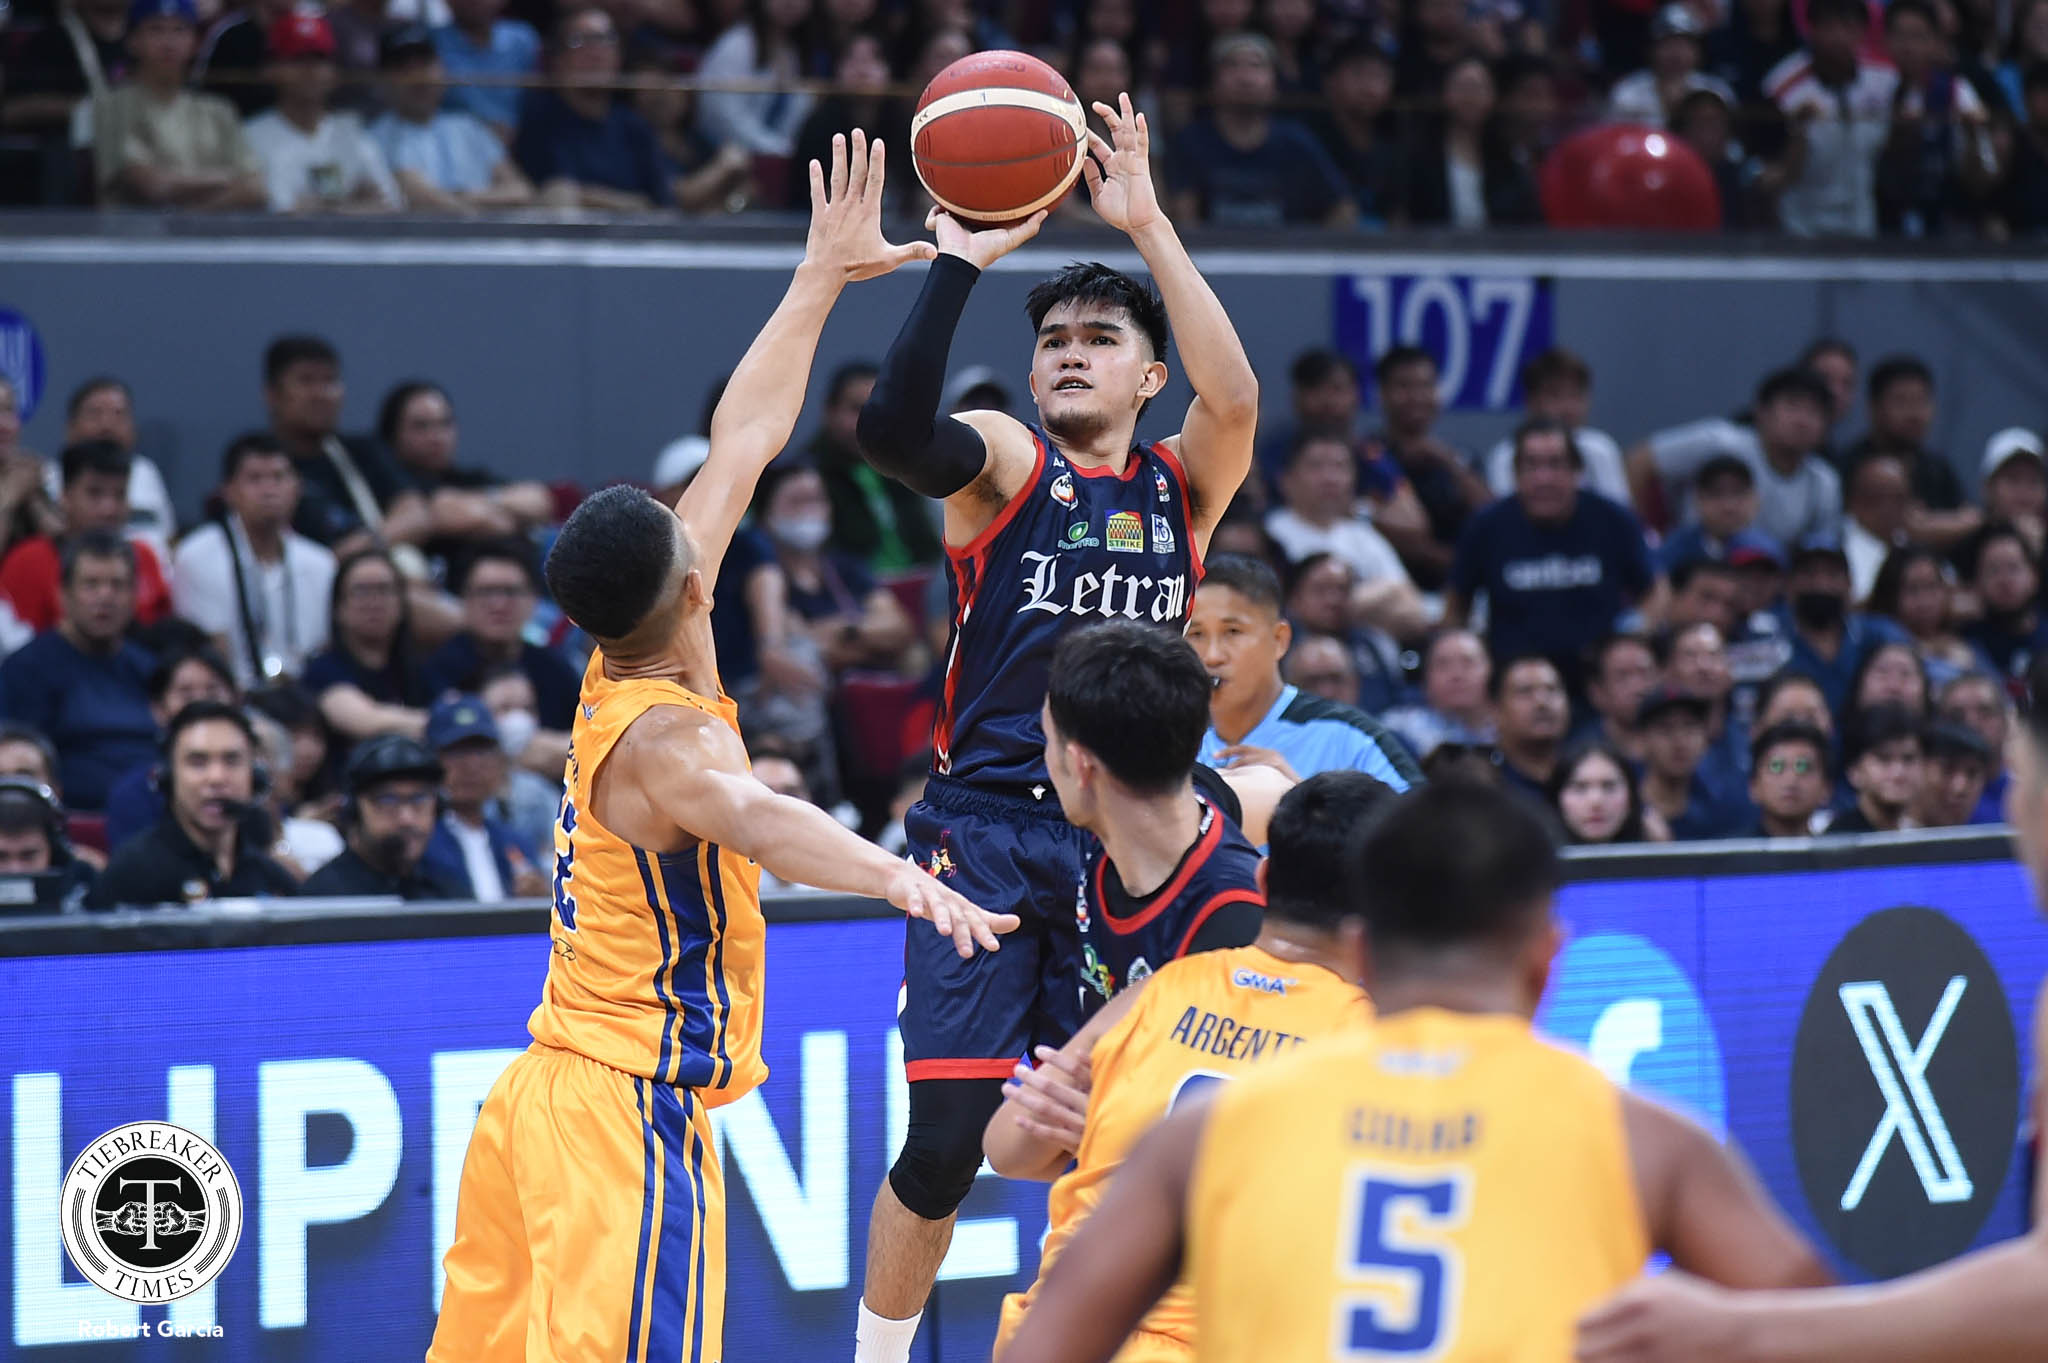 NCAA-99-JRU-vs.-CSJL-Kurt-Reyson After opening day loss, Reyson looks to bring Letran together like what Yu did before Basketball CSJL NCAA News  - philippine sports news